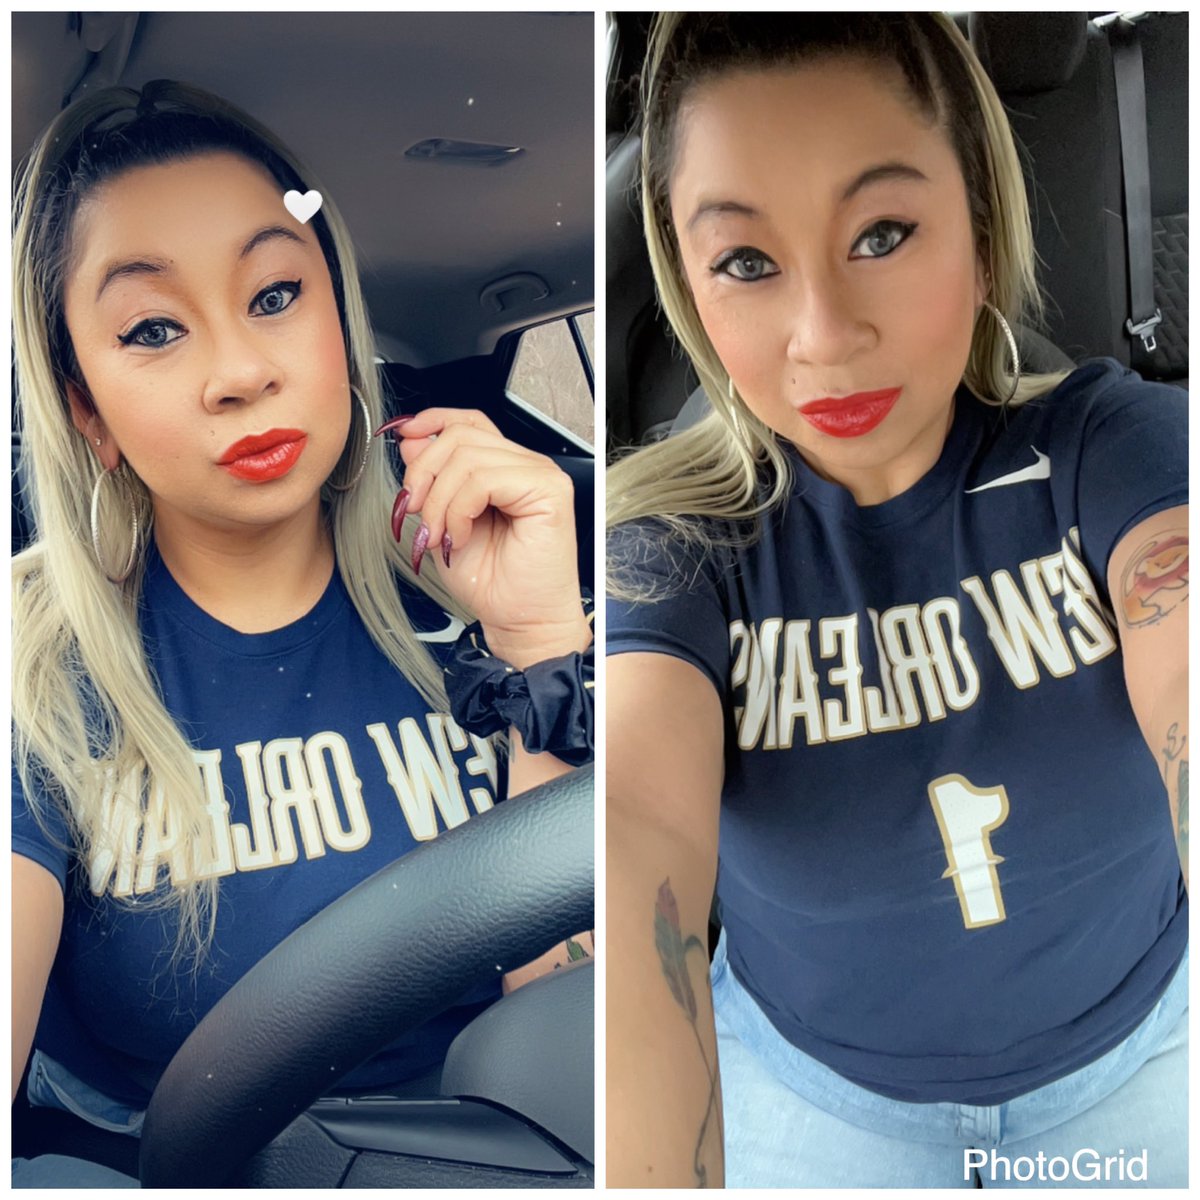 @PelicansNBA ready to head to Fedex forum to watch you guys get this NYE W. Y’all won’t hear me rooting cuz I’ll be up in da nosebleeds but I’ll be in there🙌🏼 NOLA GIRL LIV’N IN MEMPHIS @CJMcCollum @Zionwilliamson @B_Ingram13 #jonasvalaciunas #jaxonhayes @treymurphy #williegreen